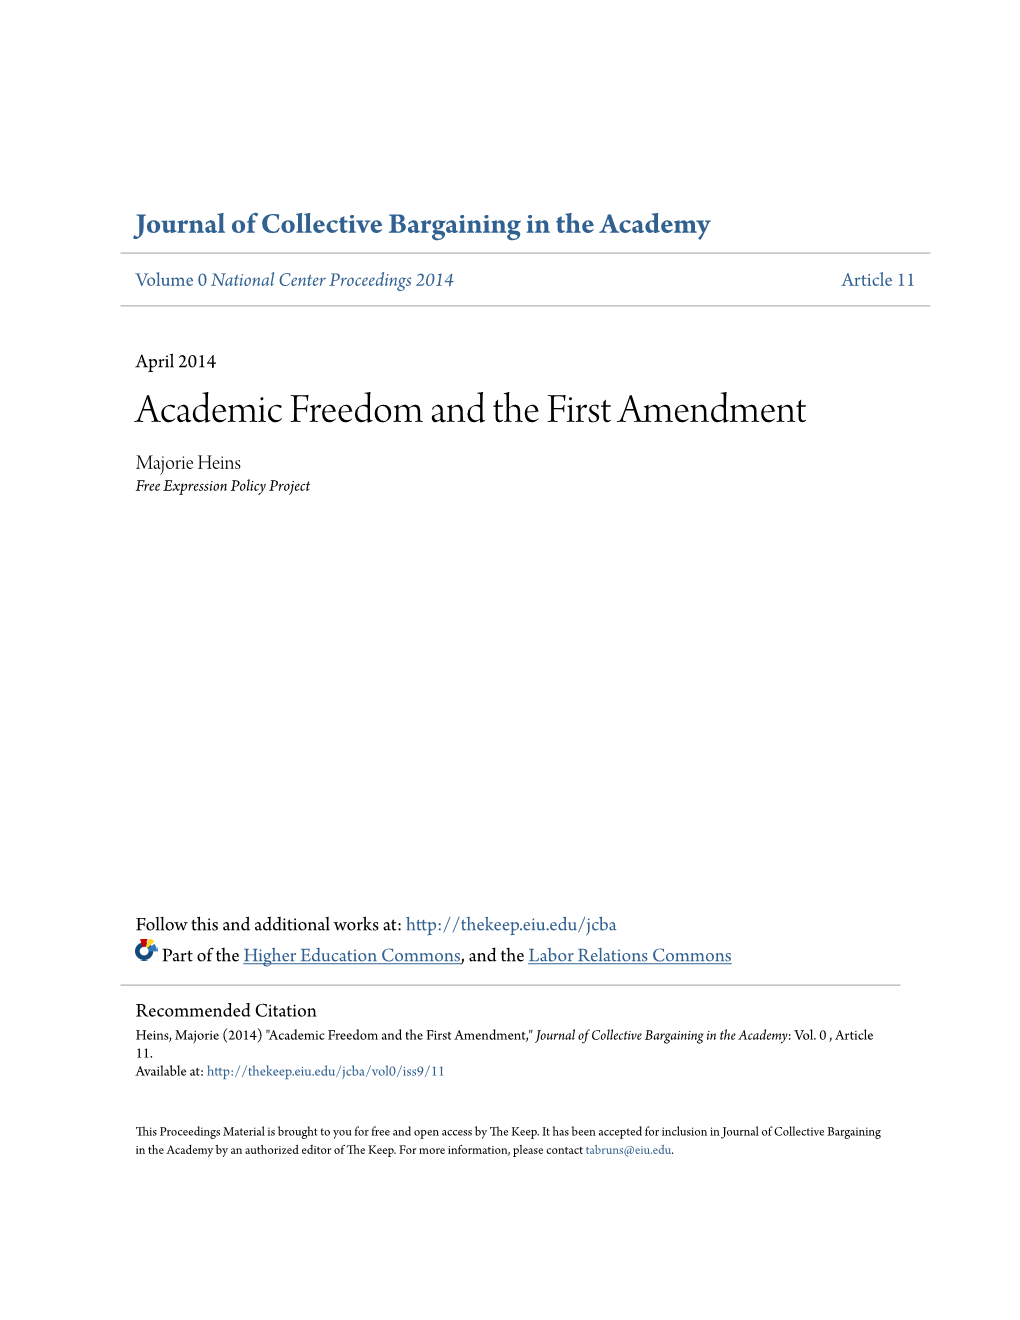 Academic Freedom and the First Amendment Majorie Heins Free Expression Policy Project